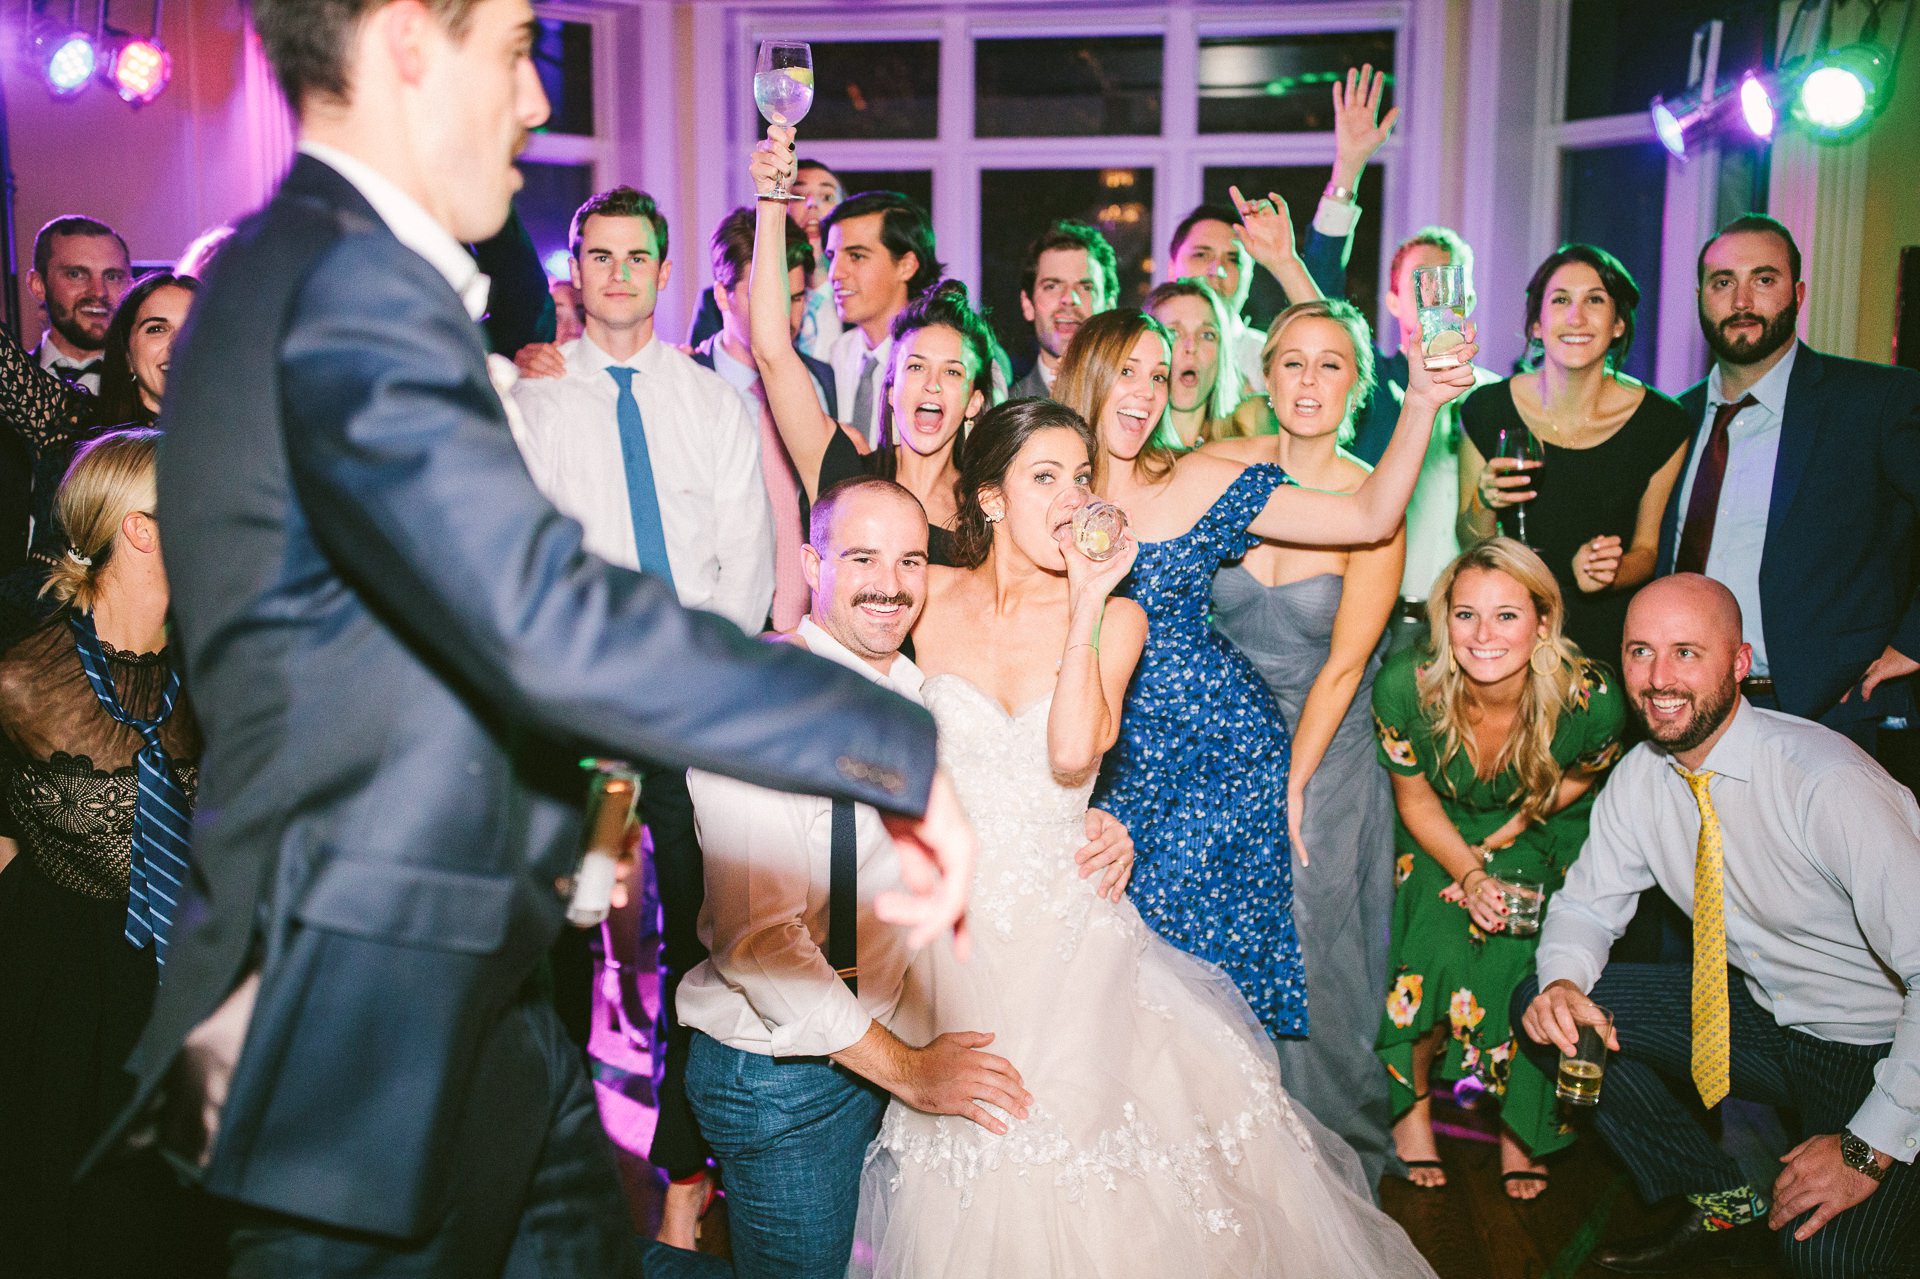 Wedding at Kirtland Country Club in Willoughby 4 4.jpg